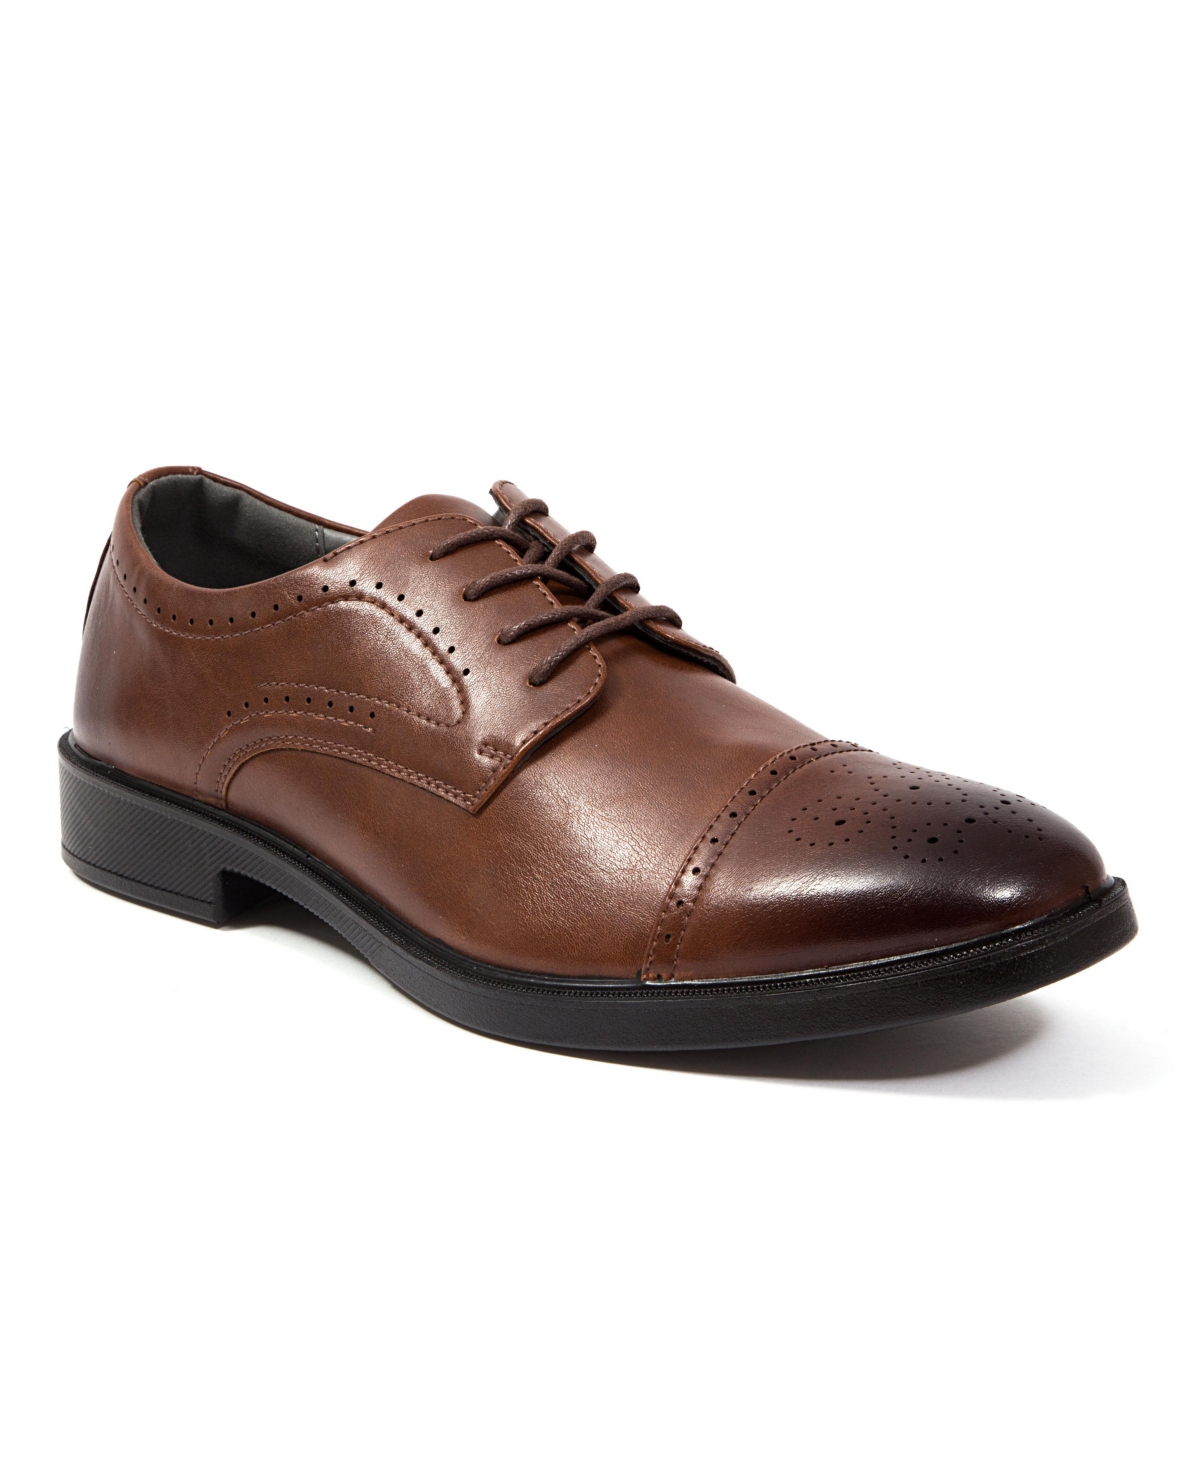 Men's Gramercy Memory Foam Water Repellant Classic Dress Casual Lace-Up Oxford Shoes - Brown